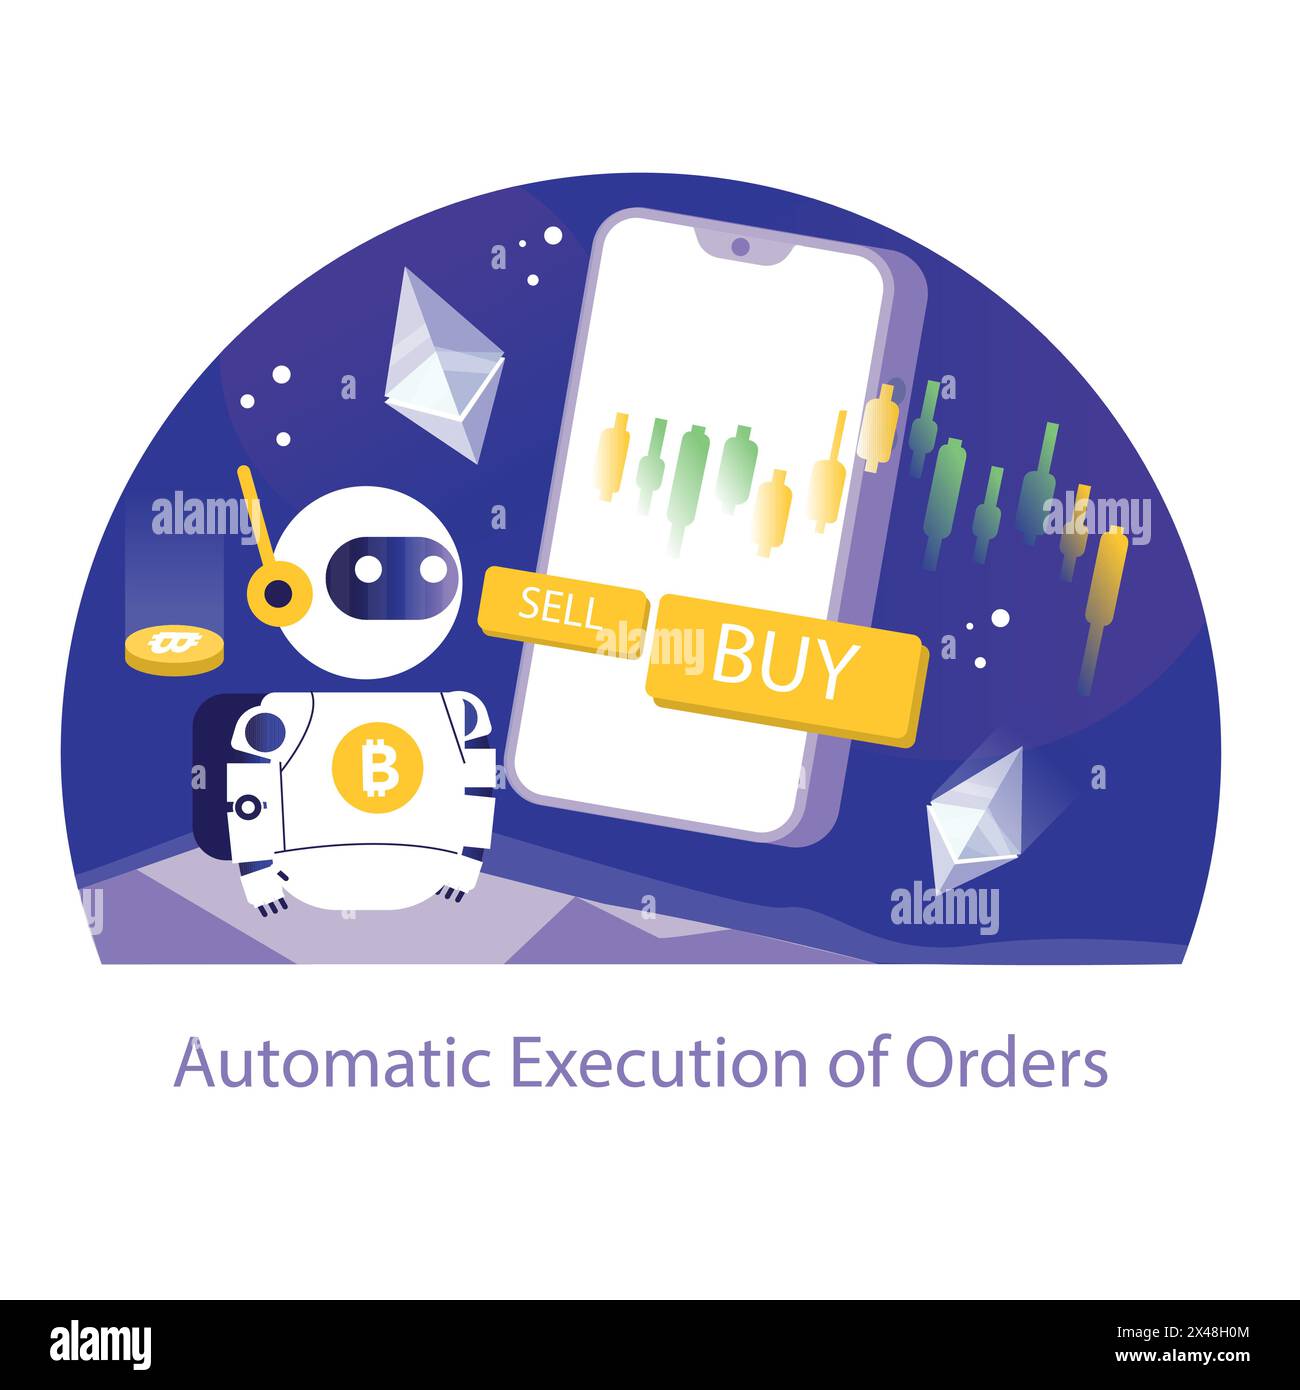 Automatic Execution of Orders concept. A vibrant depiction of a crypto trading bot efficiently managing buy and sell orders, set against a backdrop of real-time market candlestick charts. Stock Vector